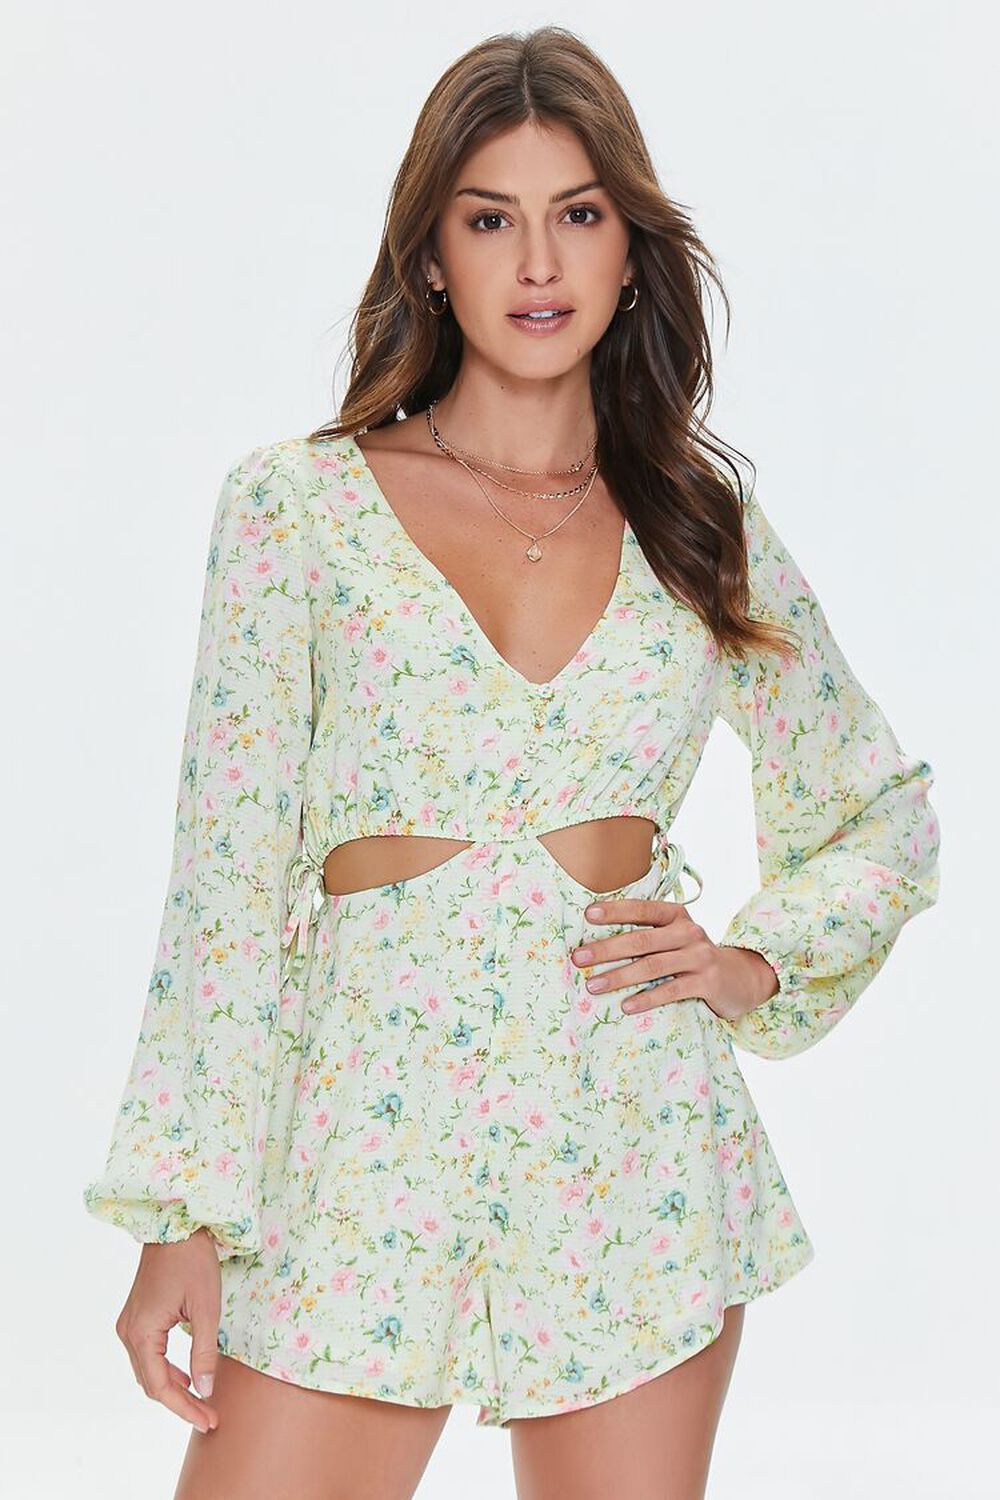 Up to 75% Off Forever 21 Sale